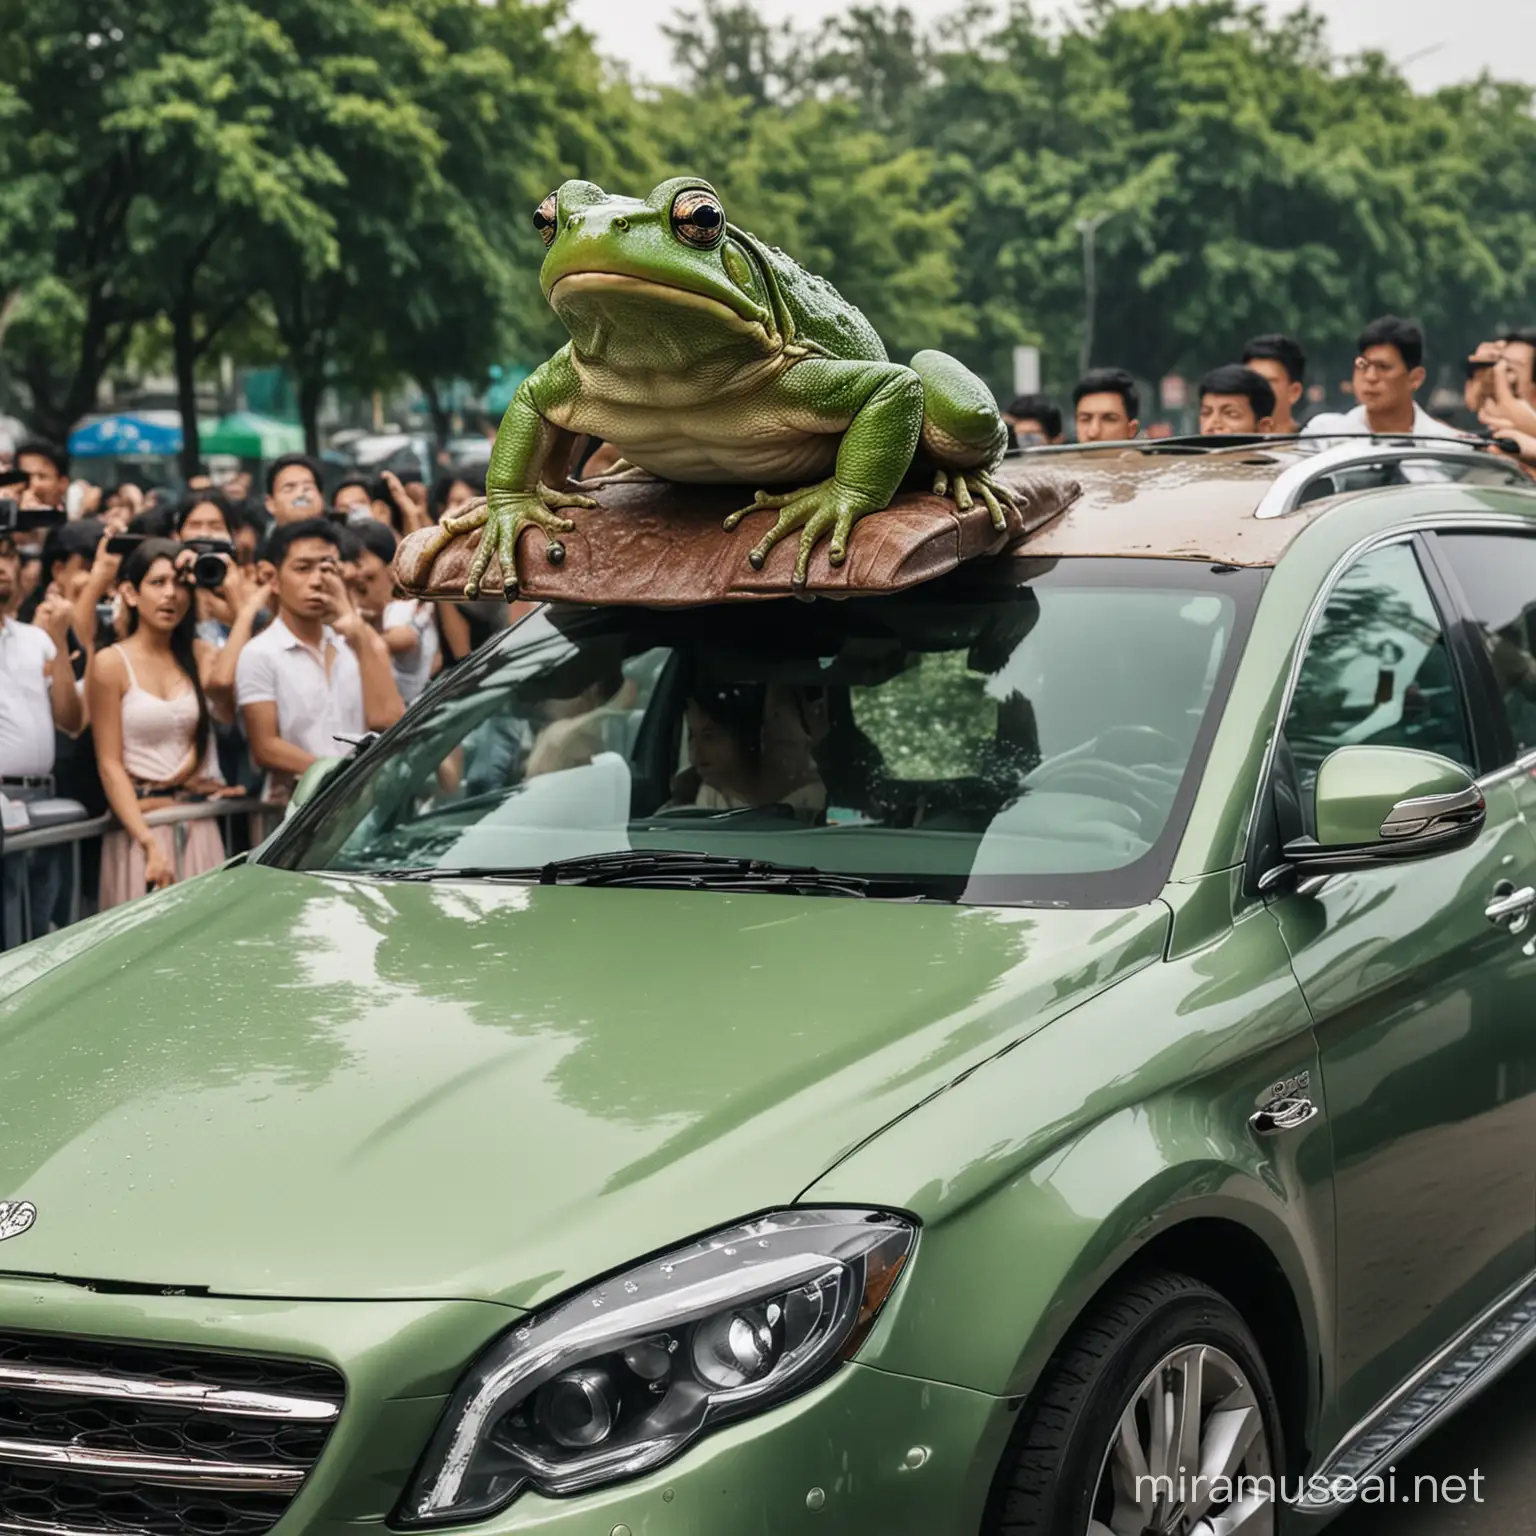 Giant Frog Perched atop Luxurious Car Startles Onlookers